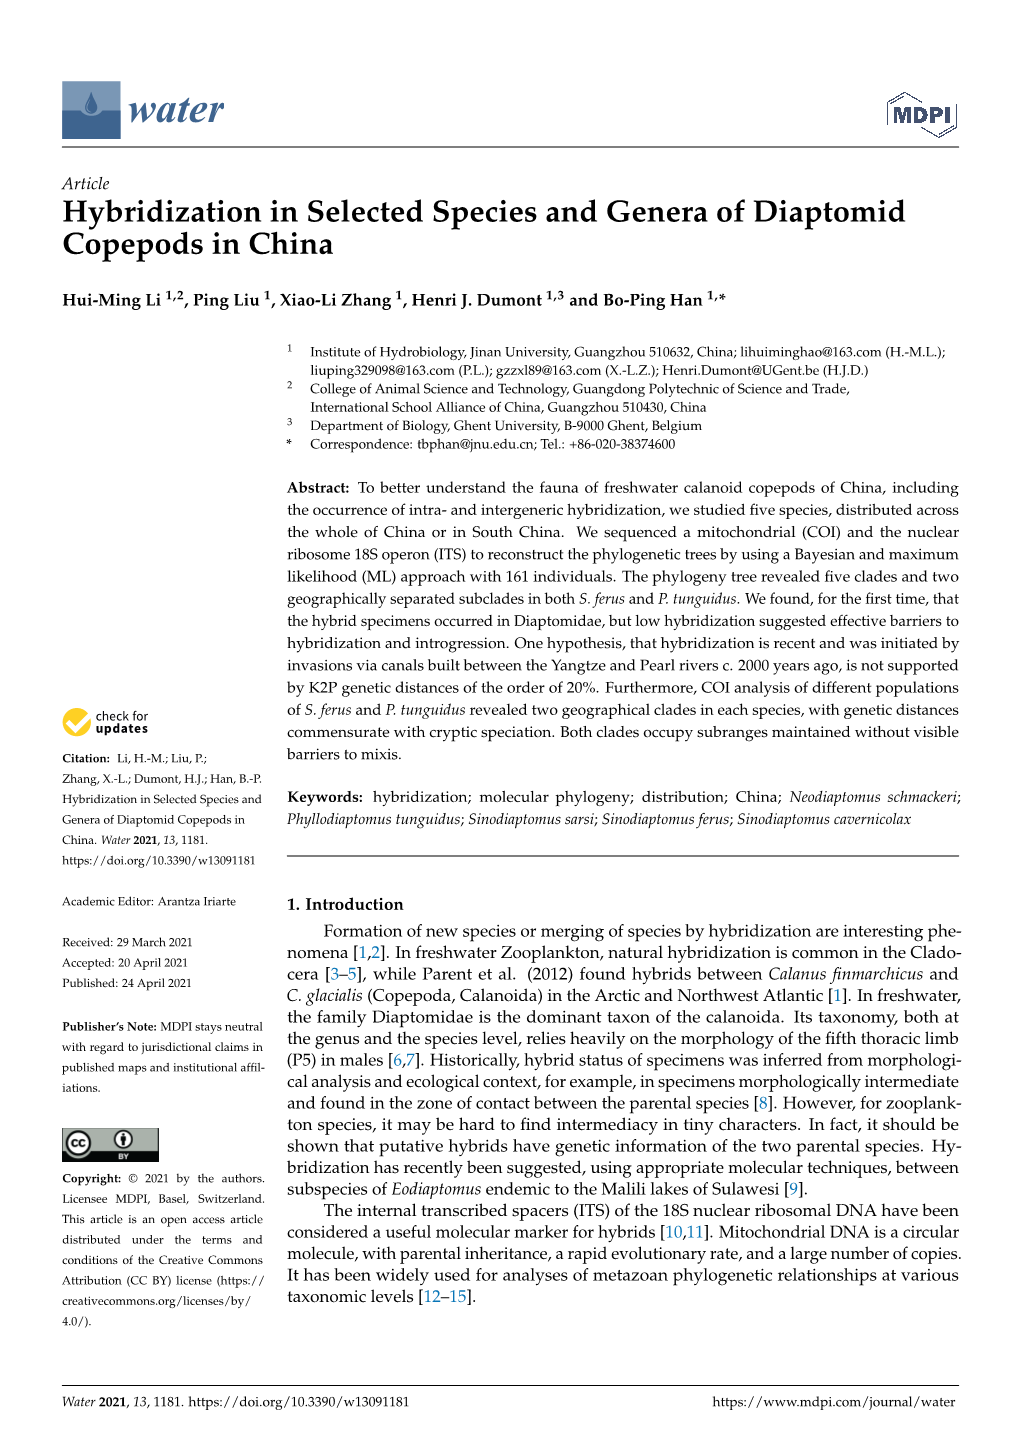 Hybridization in Selected Species and Genera of Diaptomid Copepods in China